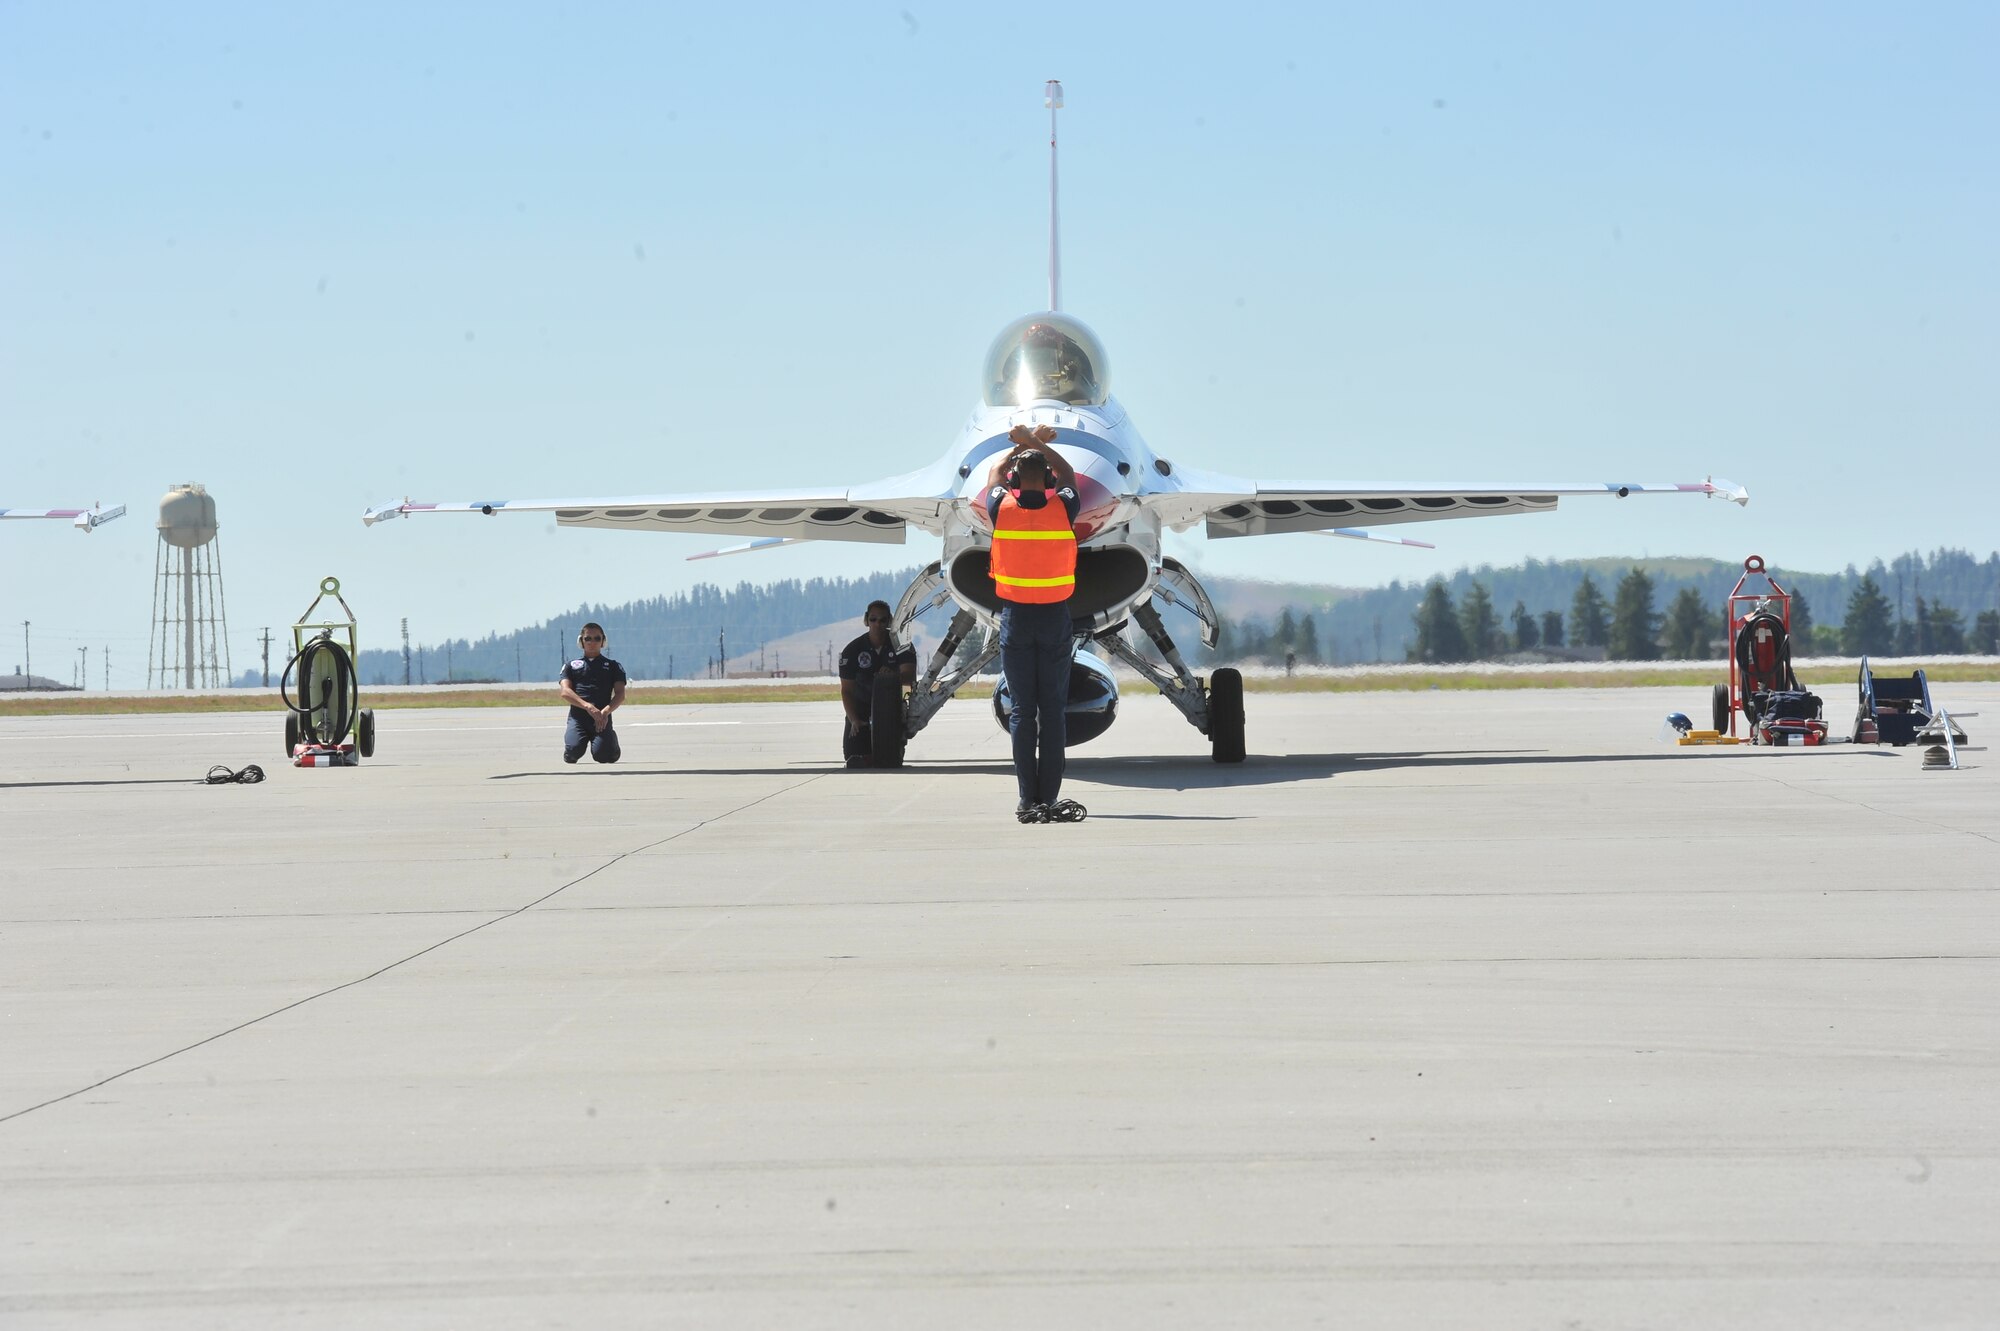 The U.S. Air Force Thunderbirds F-16 Fighting Falcon prepares for take off from the flightline at Fairchild Air Force Base, Wash., May 30, 2014.  The flight was an orientation flight for Robyn Nance, KXLY news anchor, the day prior to SkyFest 2014.  (U.S. Air Force photo by Staff Sgt. Veronica Montes)